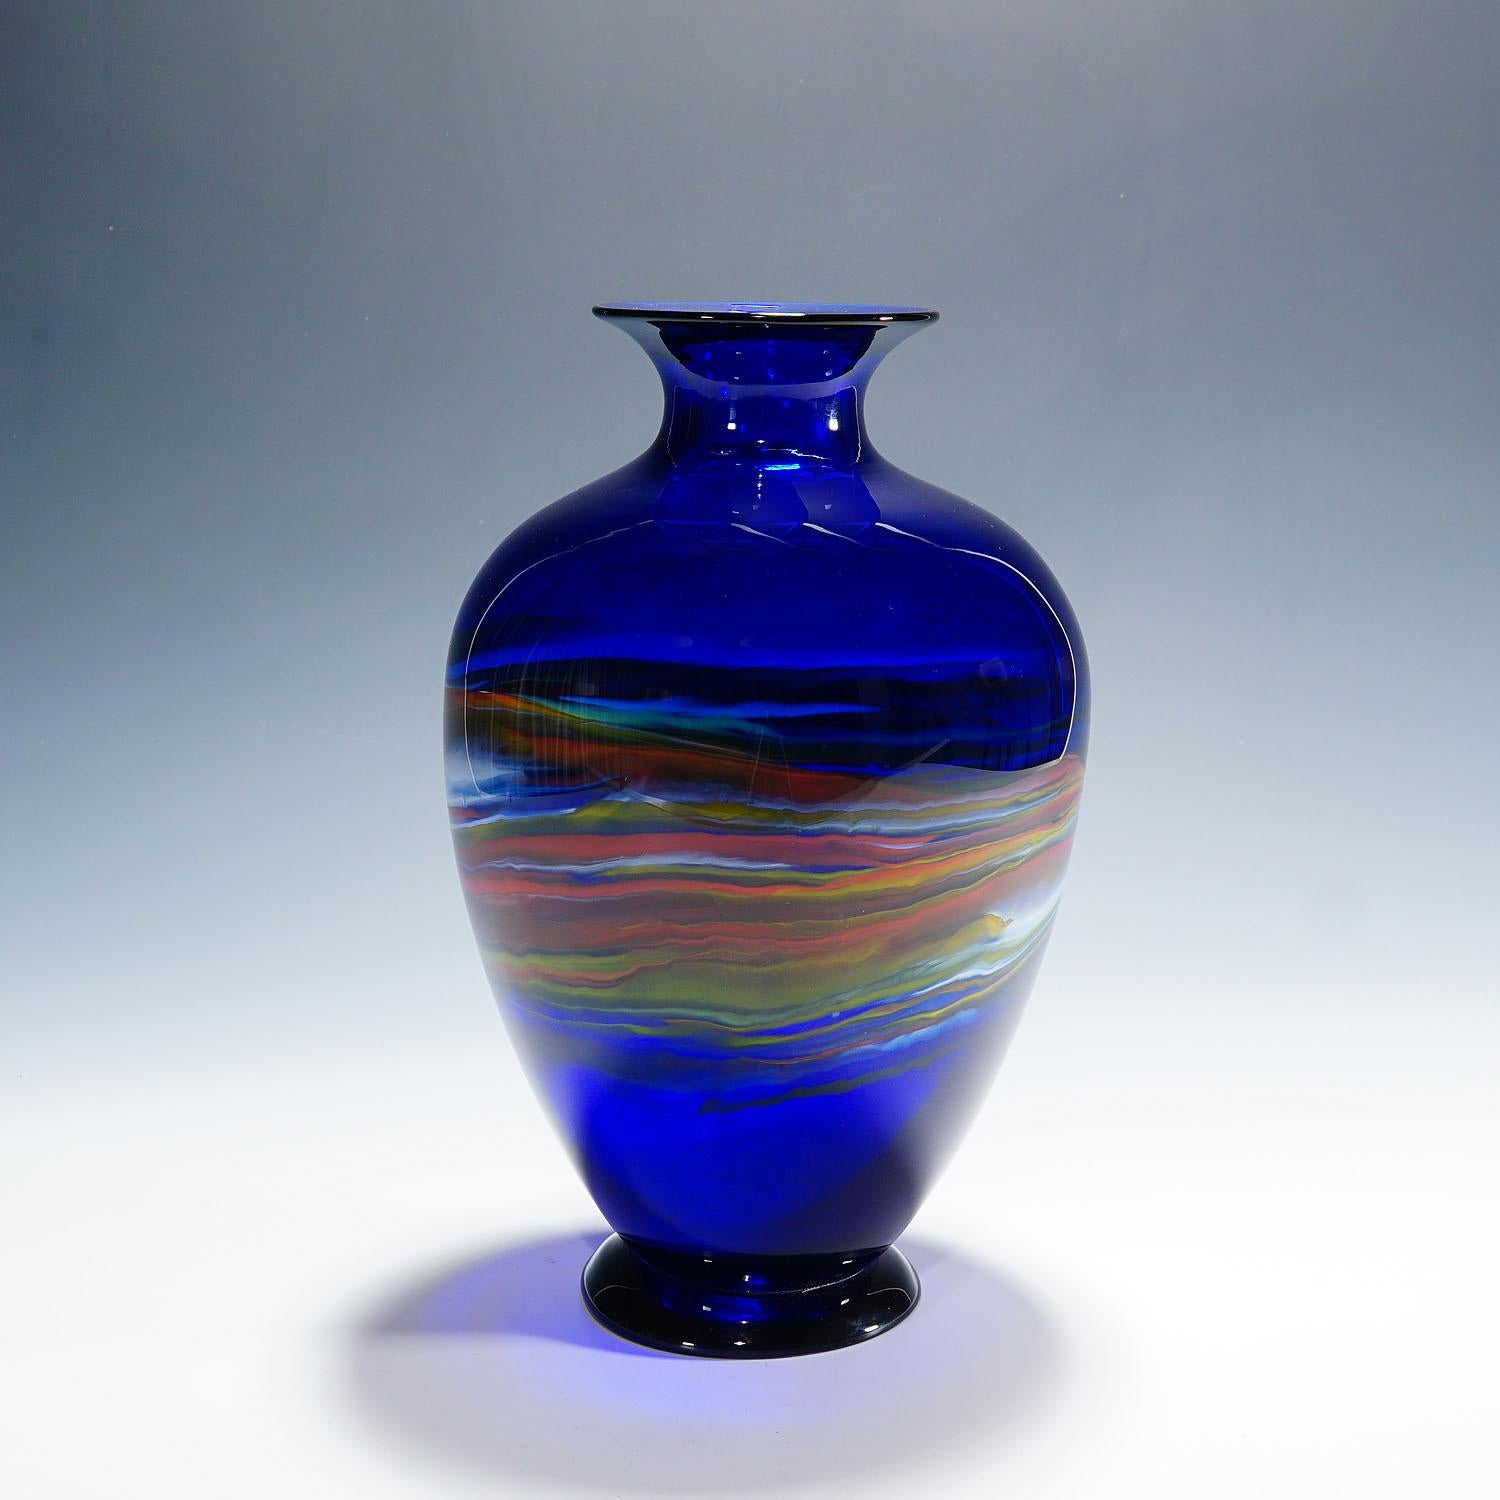 Art Glass Vase by Gianni Versage for Vetreria Archimede Seguso ca. 1990s

A large and heavy vintage art glass vase designed by Gianni Versage and manufactured by Vetreria Archimede Seguso in the 1990s. Dark blue glass with with a circumferential